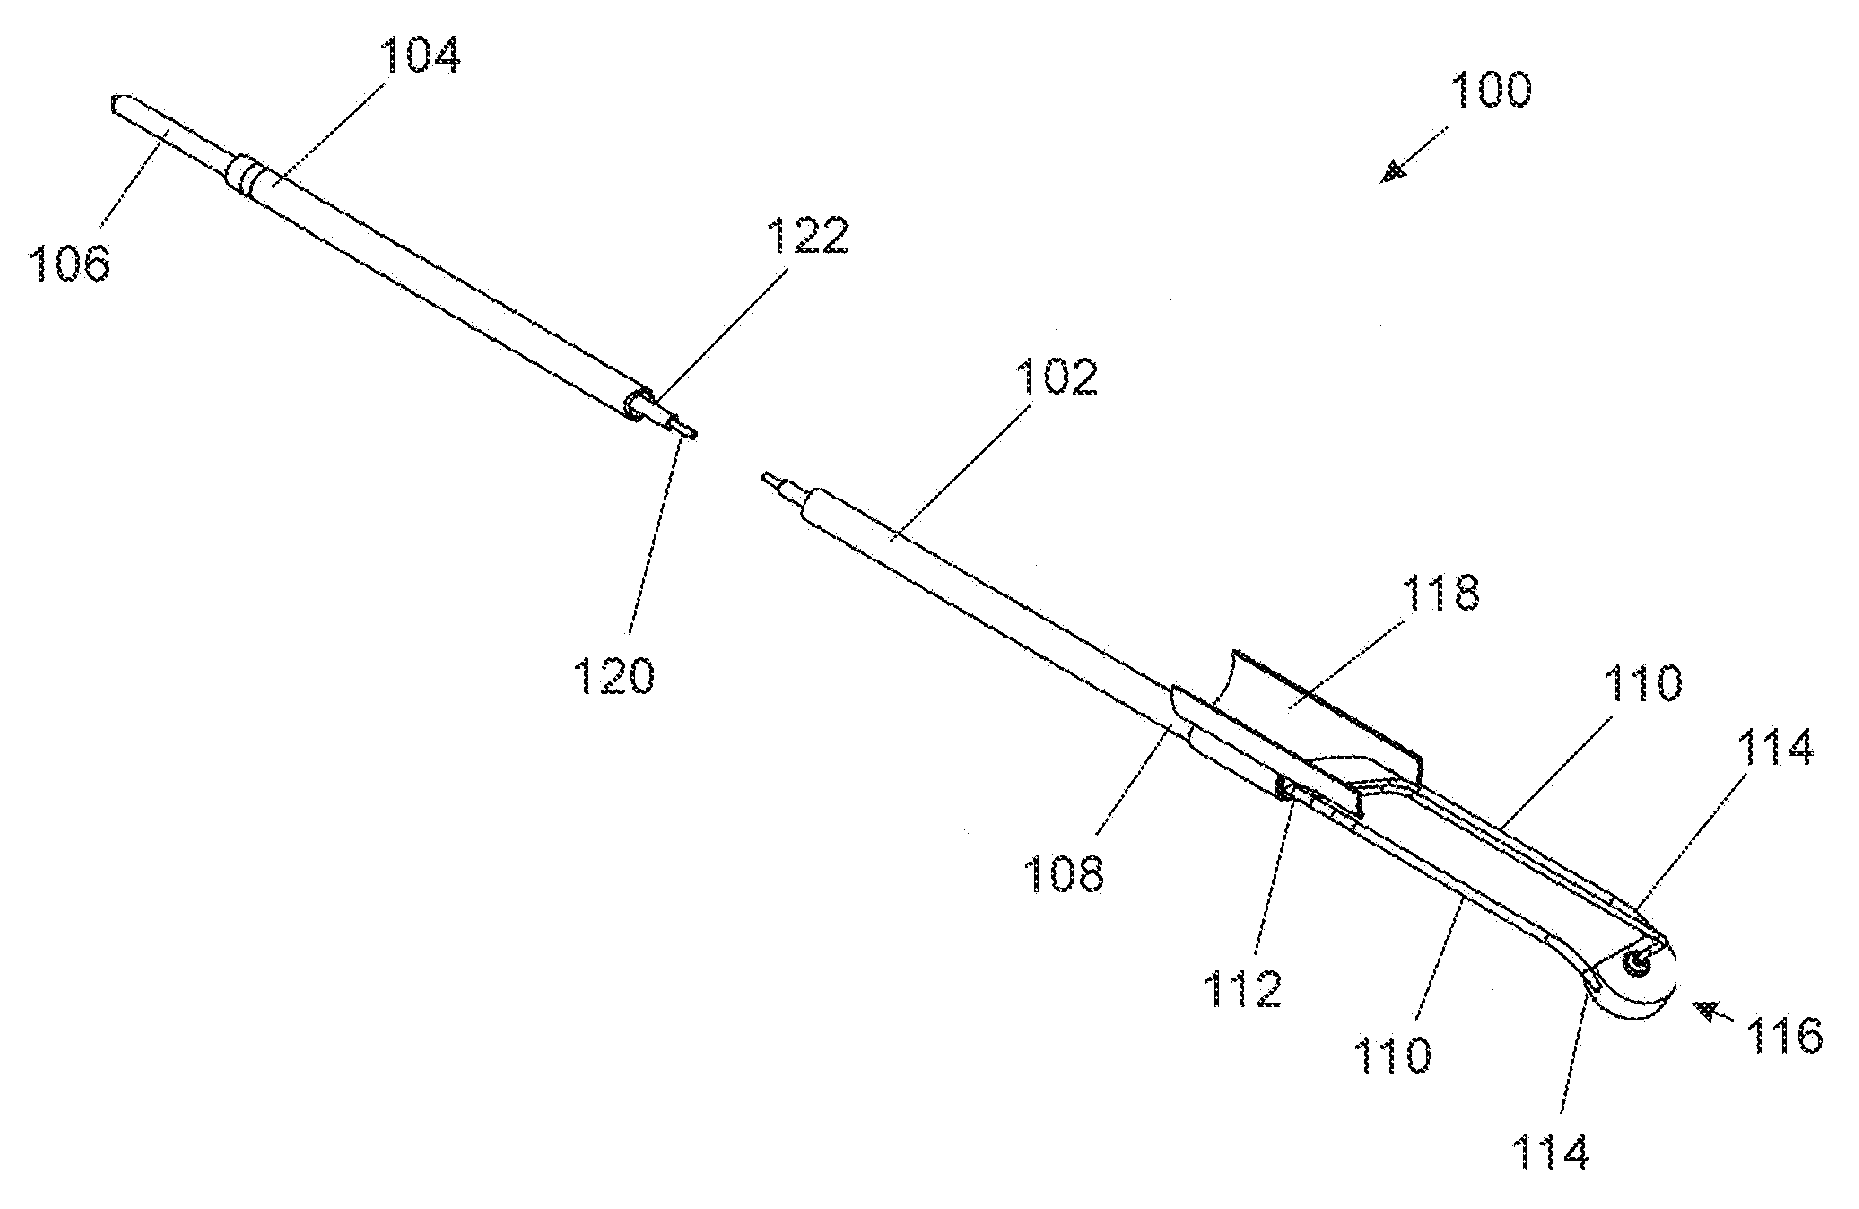 Electrosurgical Device Having Floating Potential Electrode and Adapted for Use With a Resectoscope